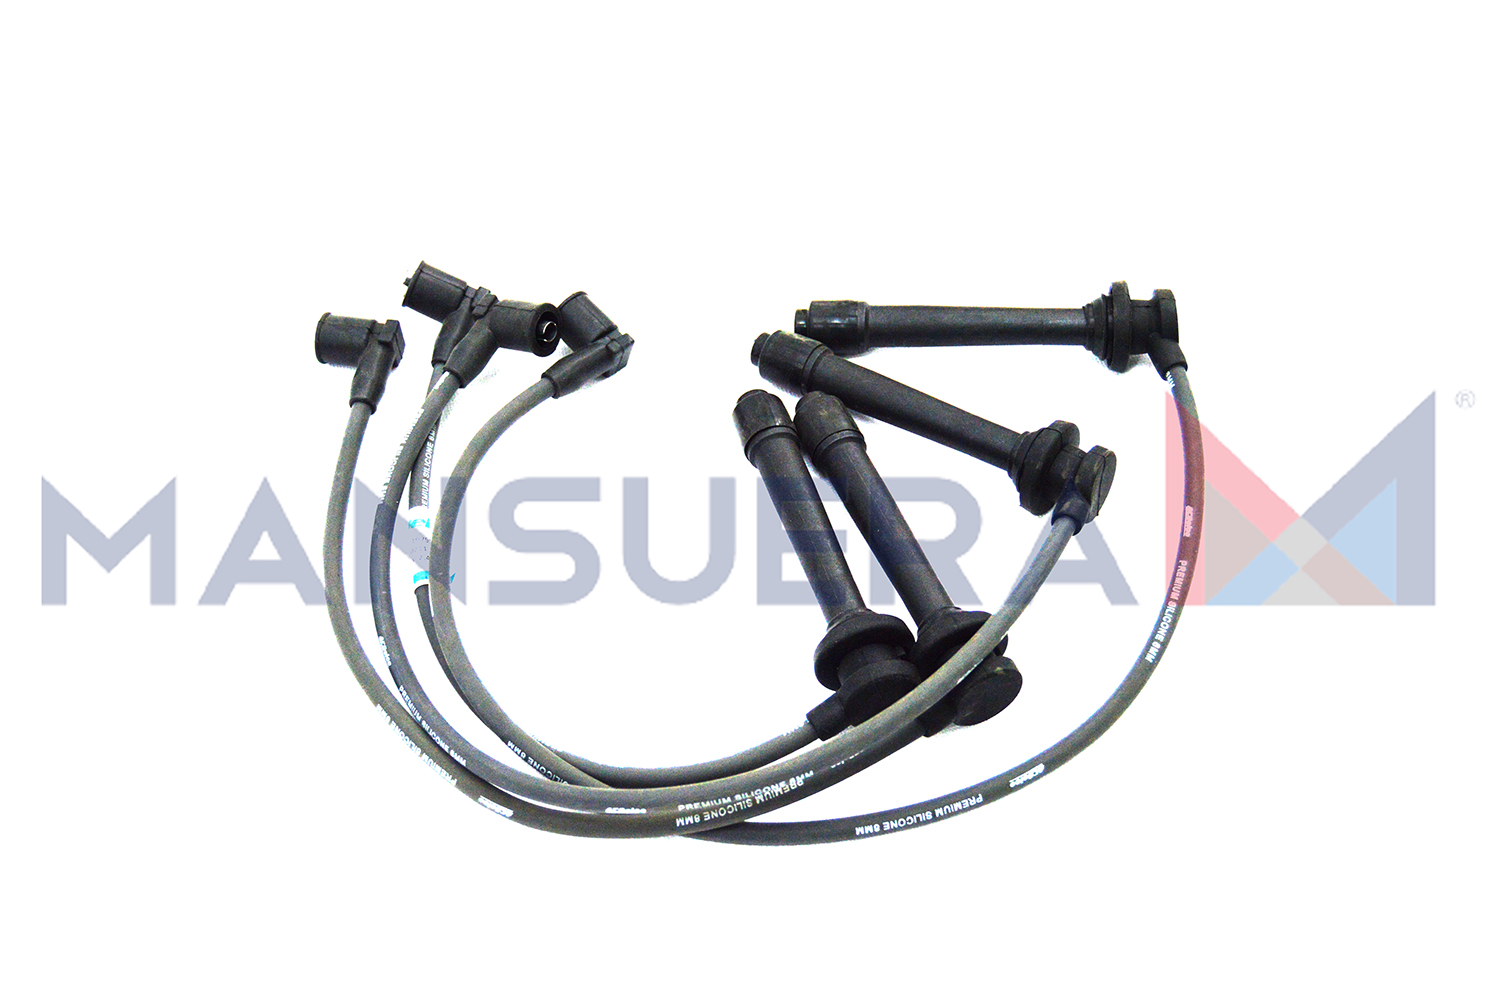 CABLES BUJIAS NISSAN FRONTIER 16V 2.4 INY. MOD. 97 >>